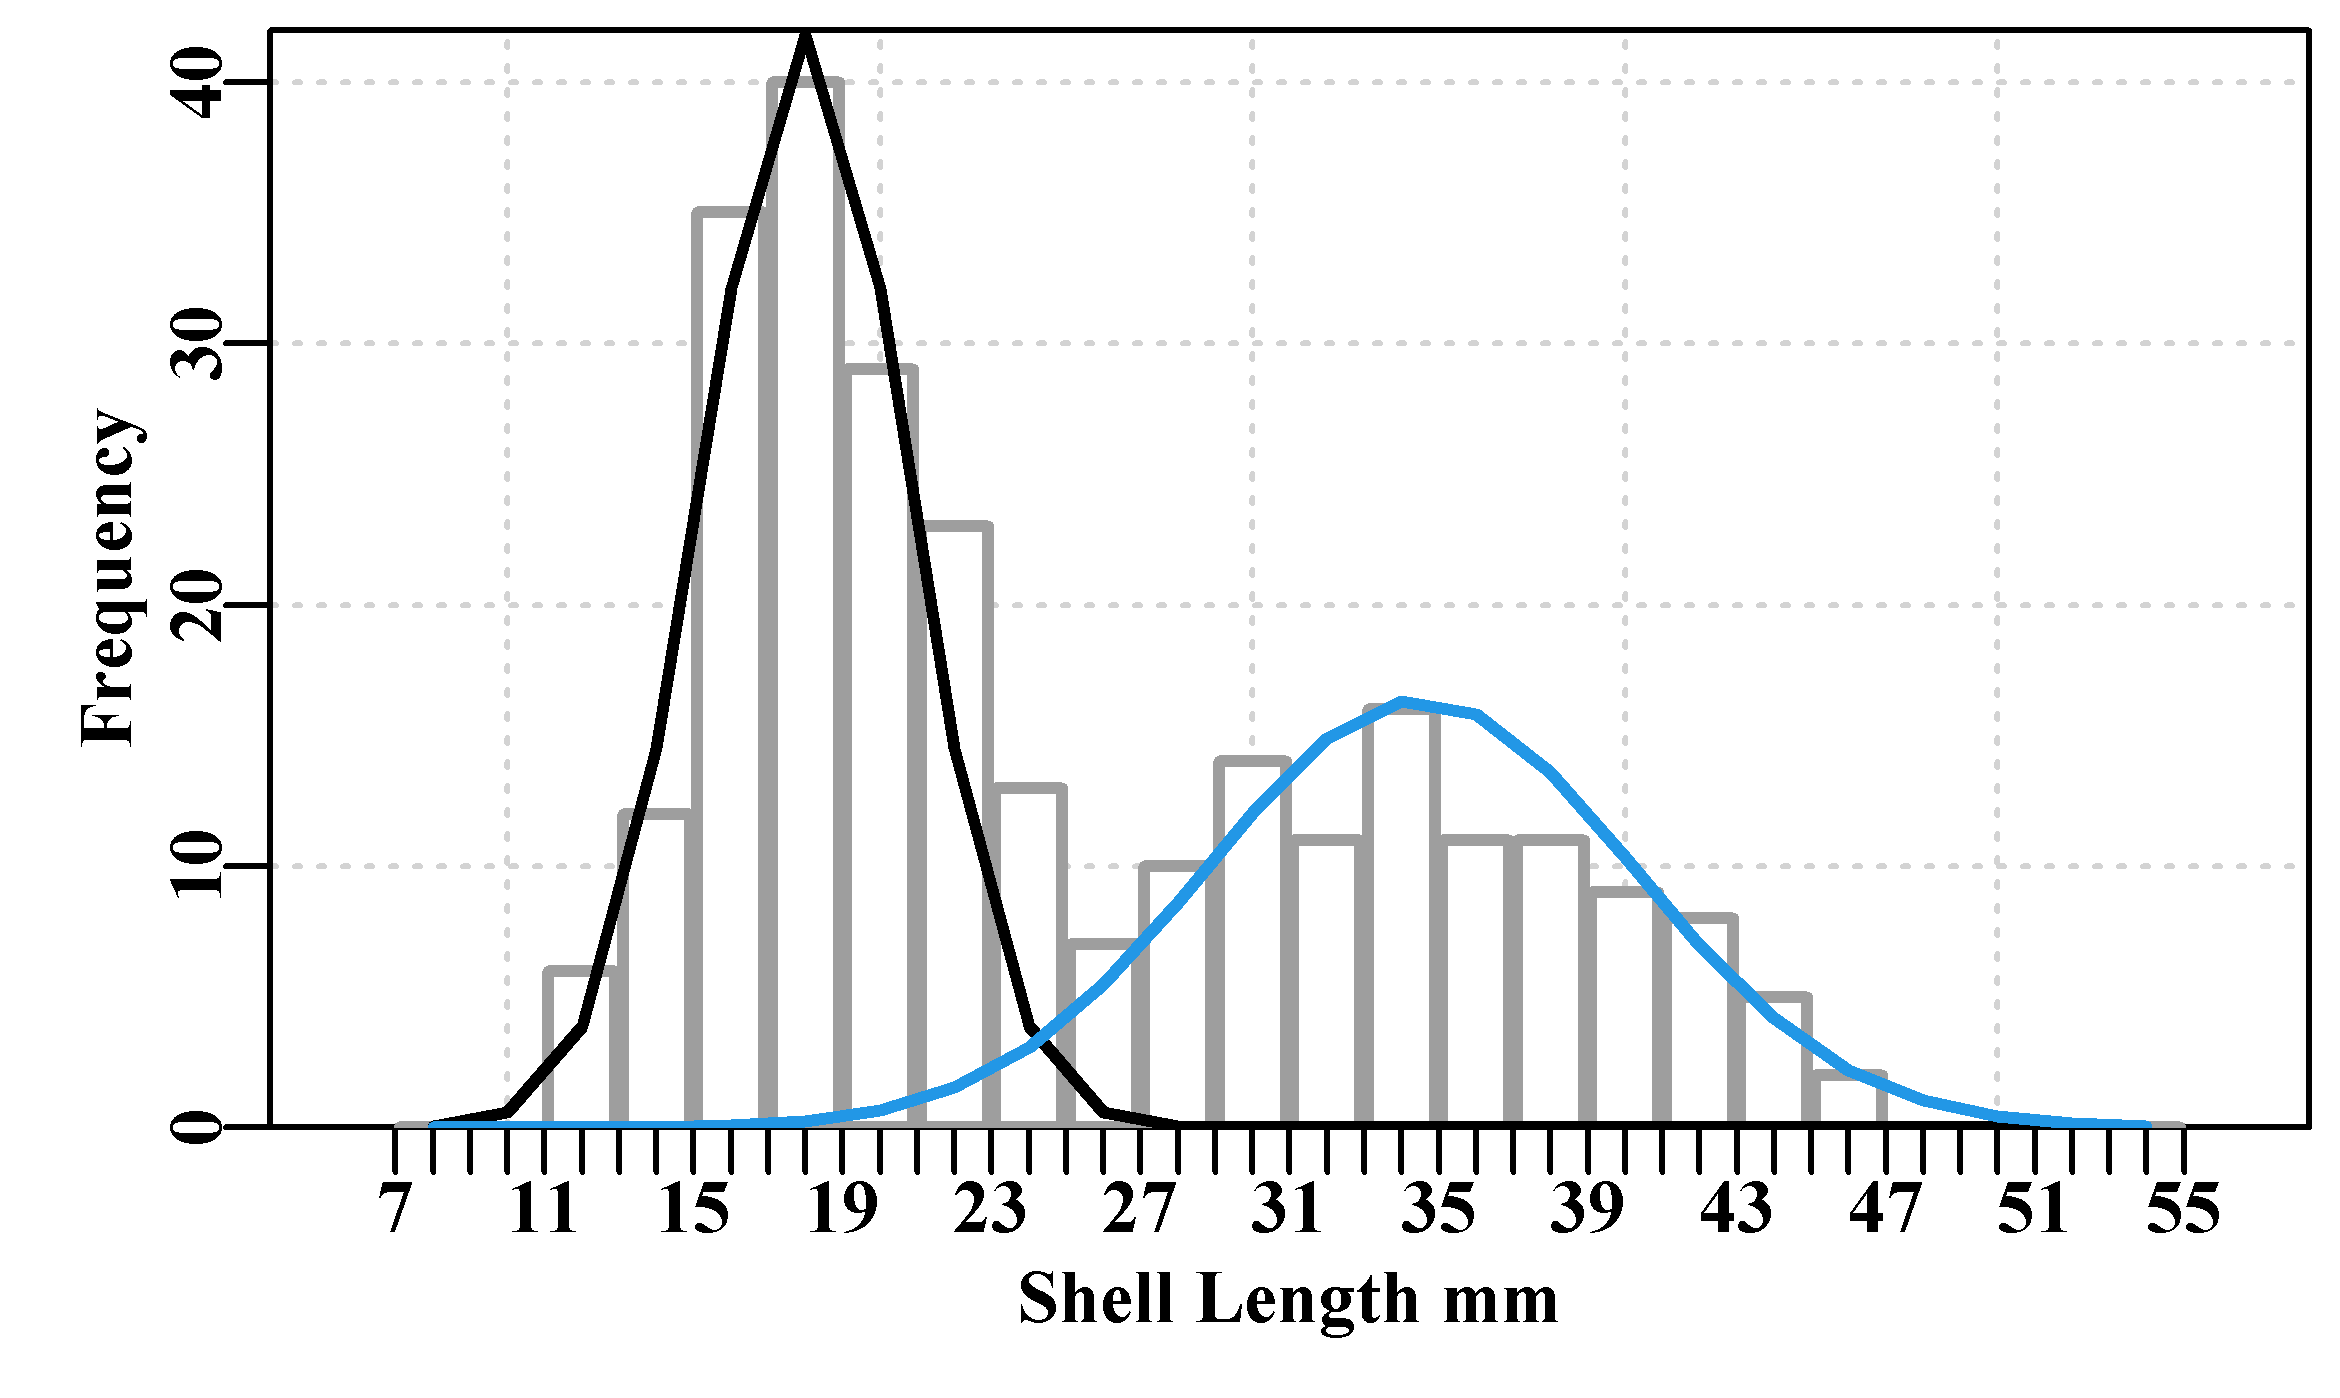 Two Normal distributions from initial parameter guesses imposed upon the length-frequency counts of juvenile abalone from southern Tasmania sampled in 1992.